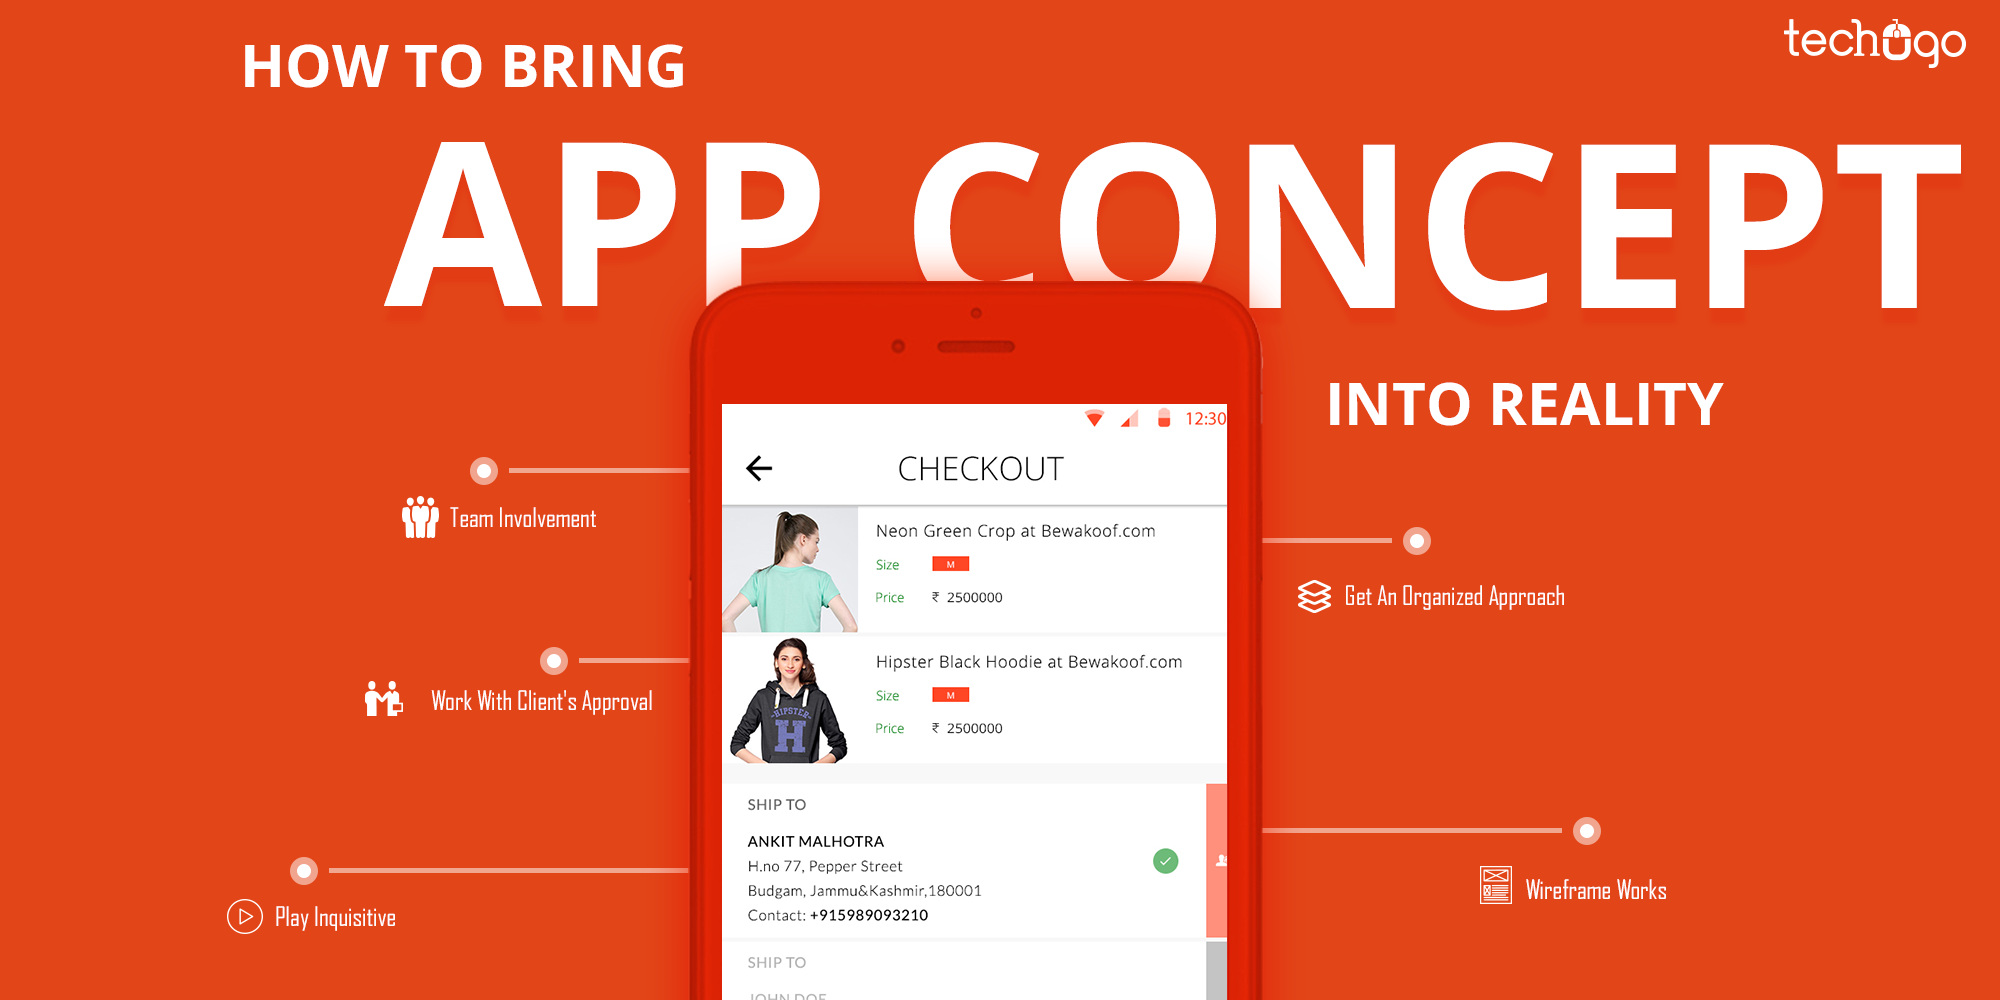 How To Bring App Concept Into Reality